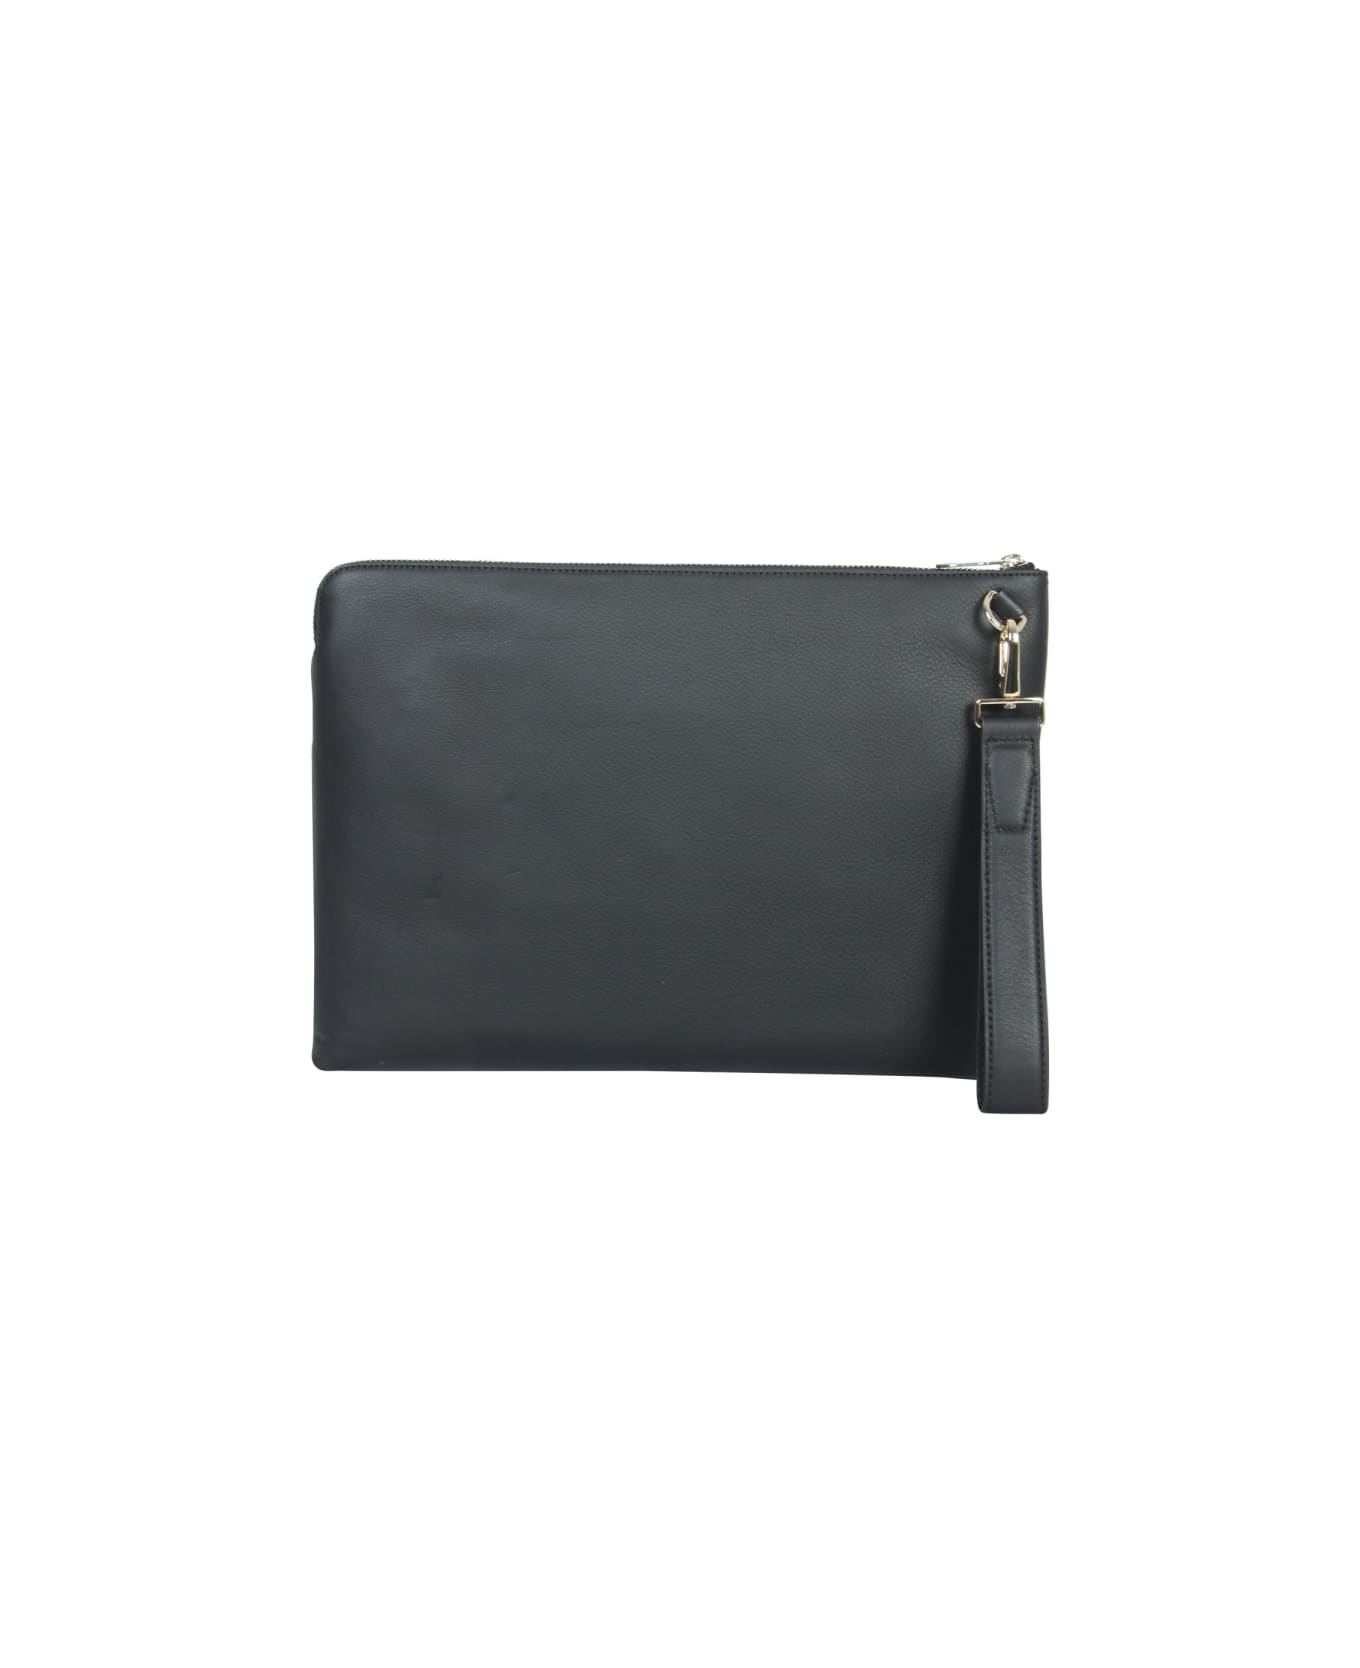 Paul Smith Leather Document Bag - BLACK バッグ